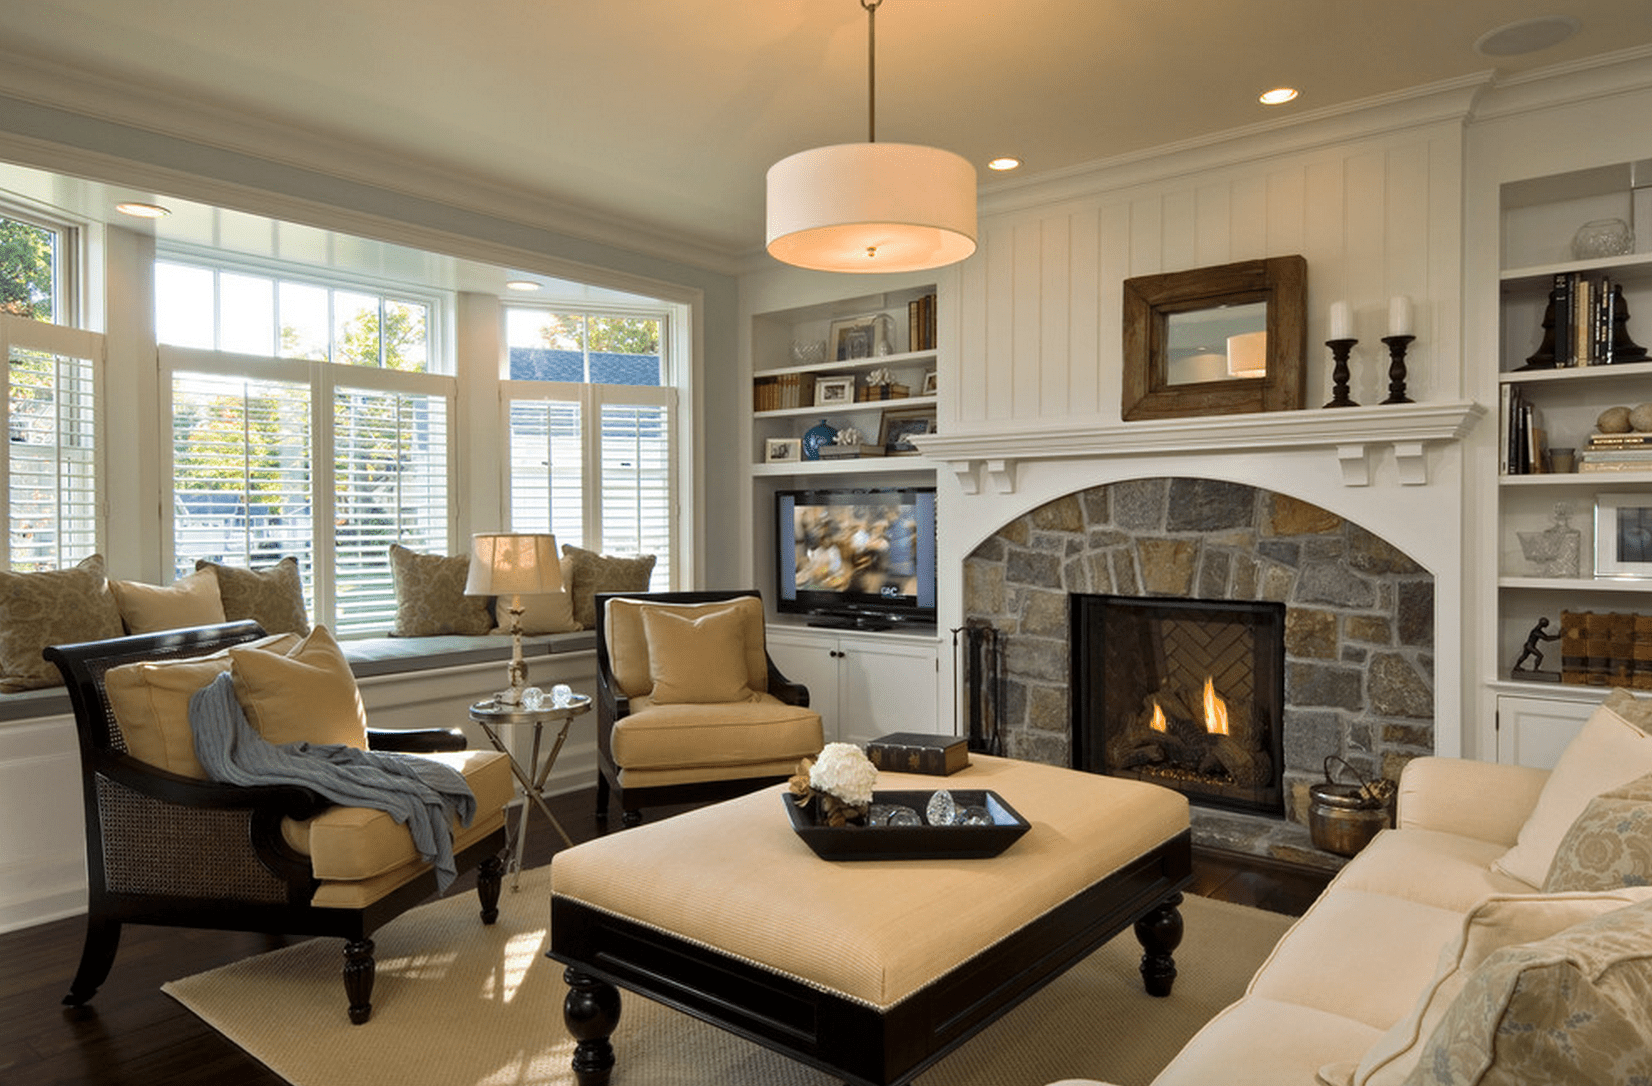 Ideas To Decorate Living Room With A Fireplace